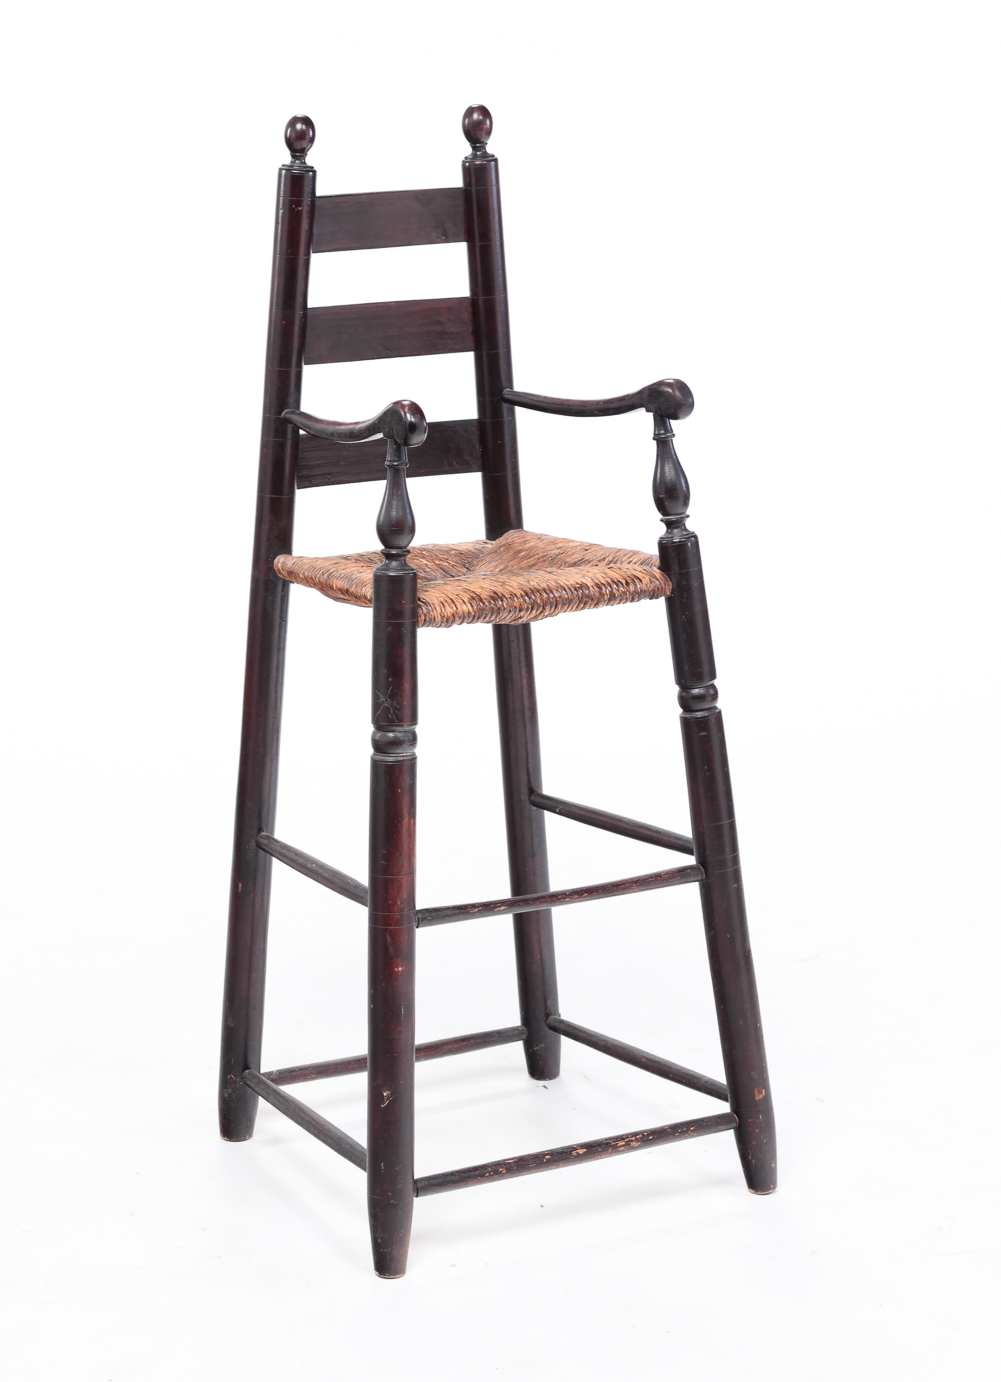 AMERICAN COUNTRY YOUTH HIGH CHAIR.